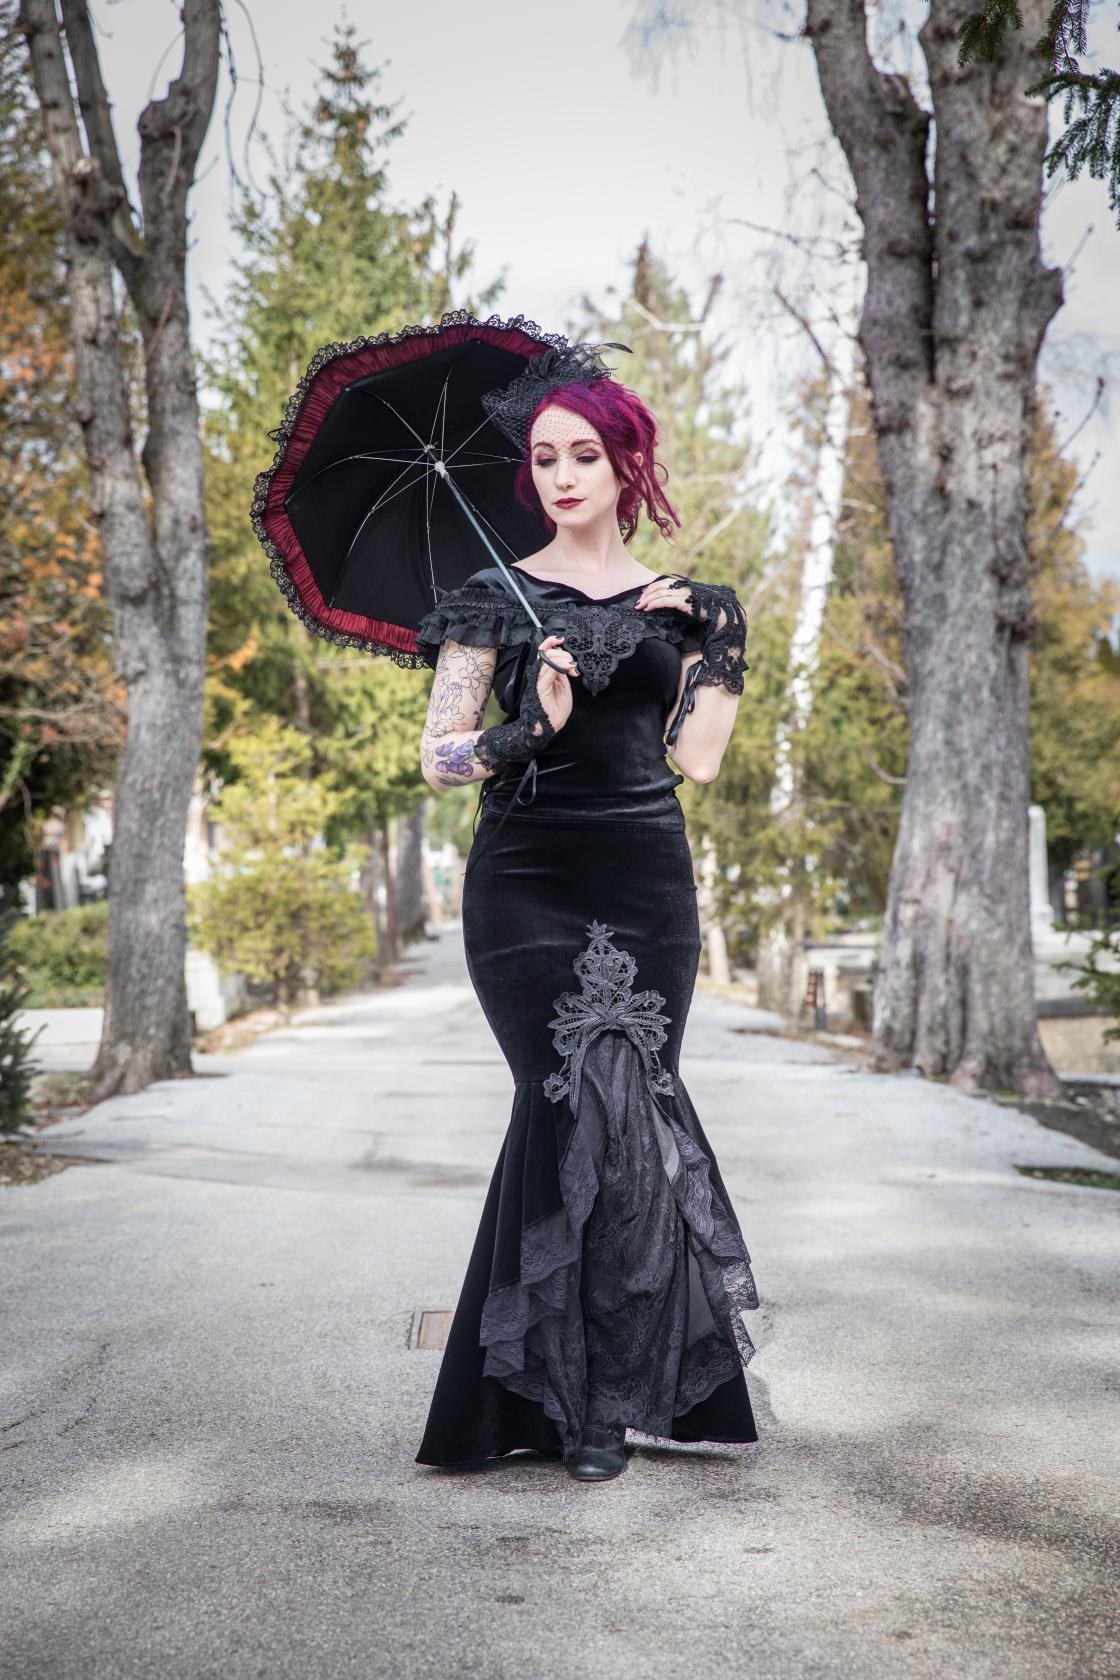 Lace Enchantress Gown from www.moonmaiden-gothic-clothing.co.uk | Gowns,  Gothic outfits, Ball gowns